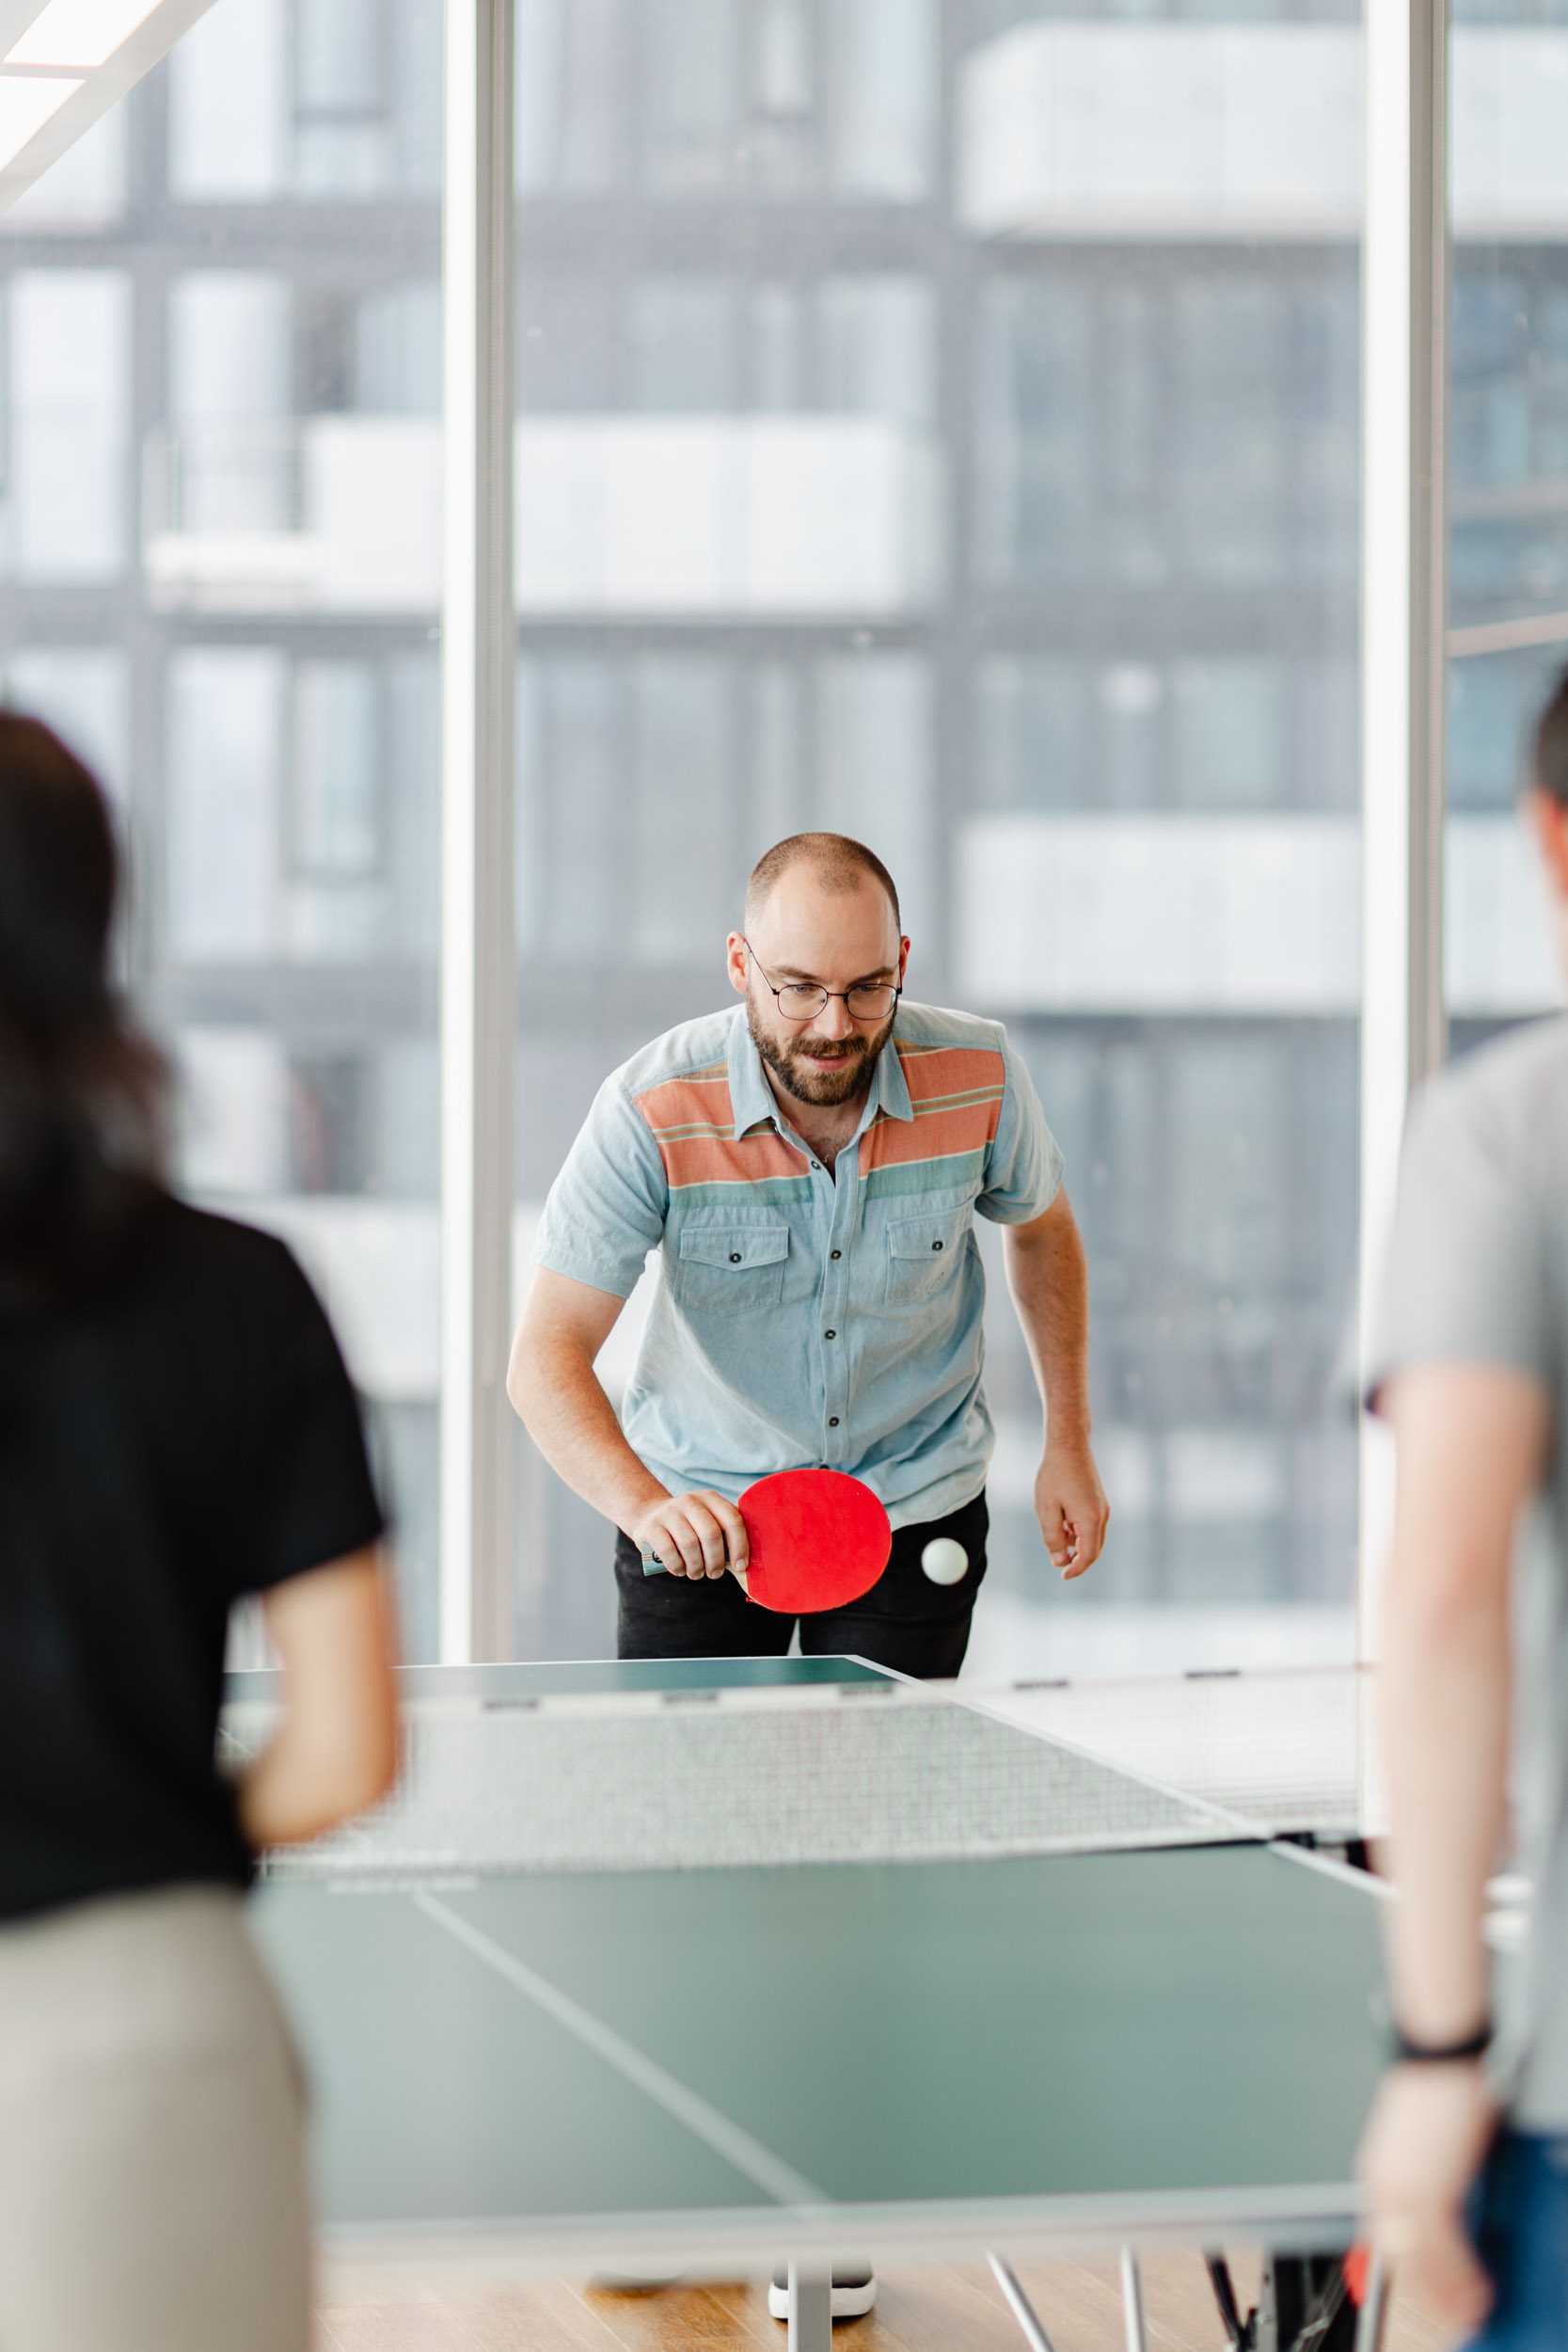 Employees at Index Exchange engage in a competitive game of ping pong within their office environment.